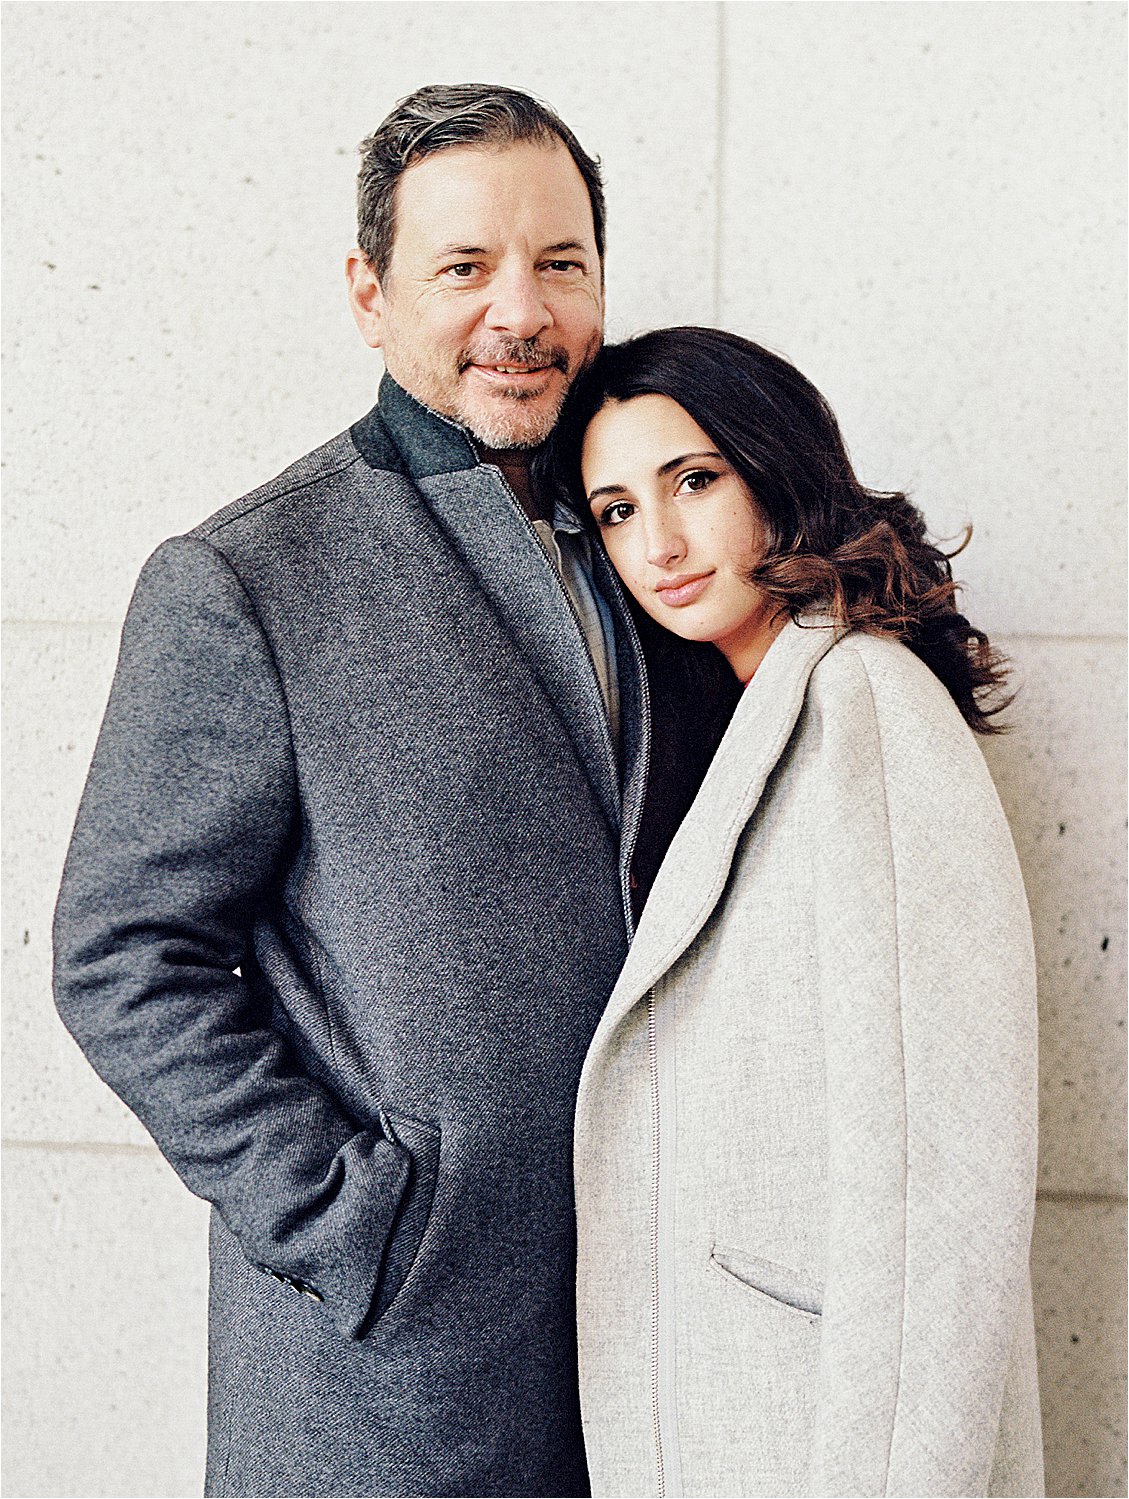 Winter DC Engagement Session With DC Wedding Photographer, Renee Hollingshead